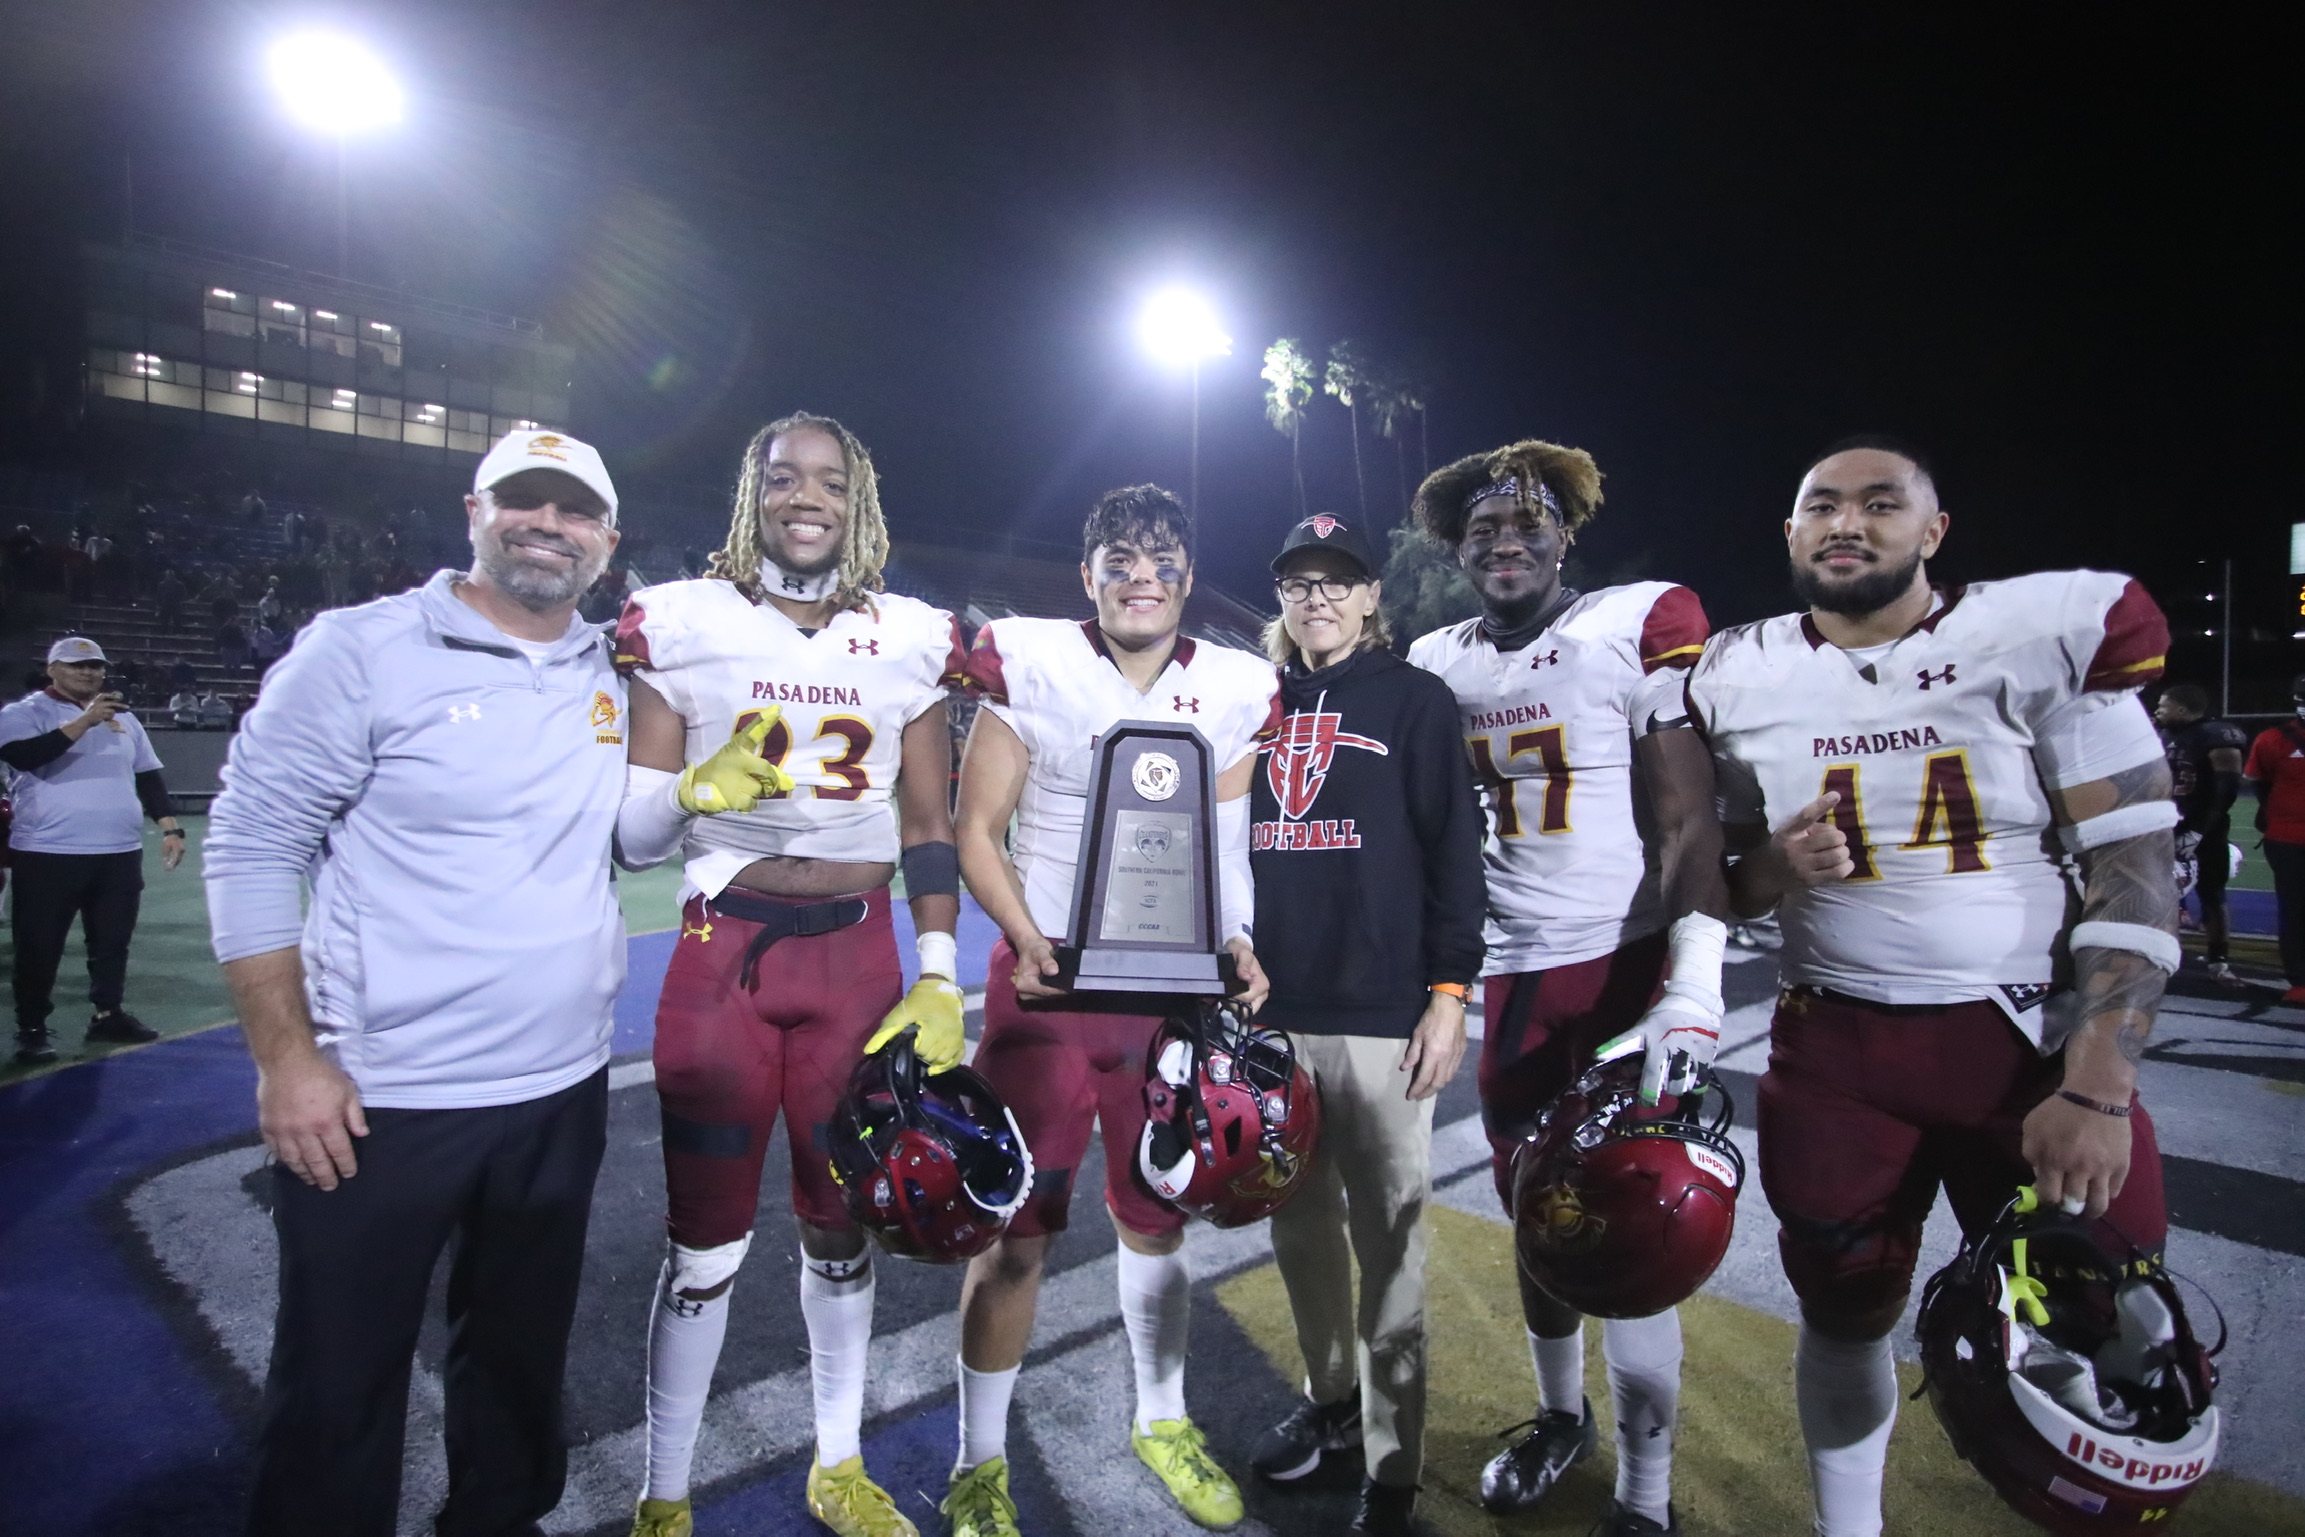 Coach Robert Tucker celebrates with his team captains winning the SoCal Bowl championship on Saturday night. Kaydon Spens, Kade Wentz (with trophy), Justen Campbell, and Michaelangelo Loretto (photo by Michael Watkins).